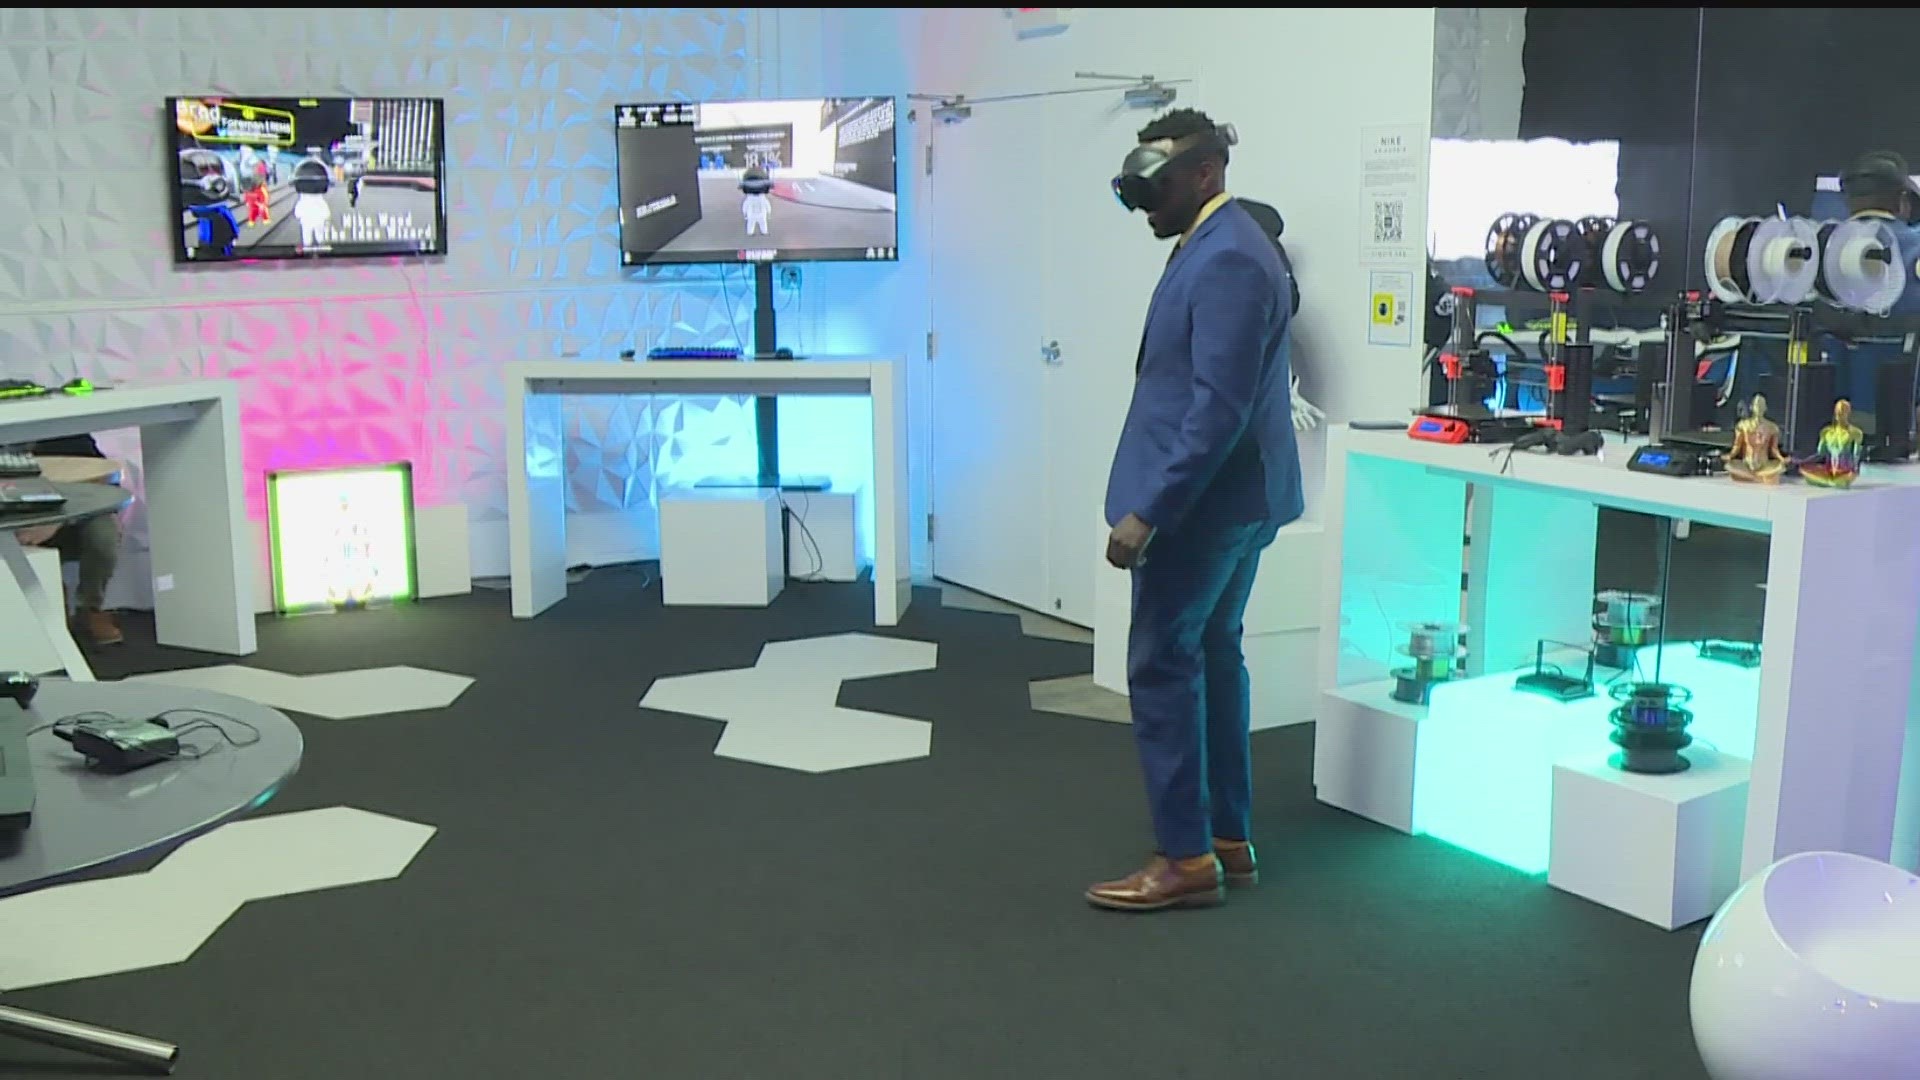 Human-computer interaction will be a huge component of the future, but REM 5 VR Lab is trying to bring technology to the masses right now.